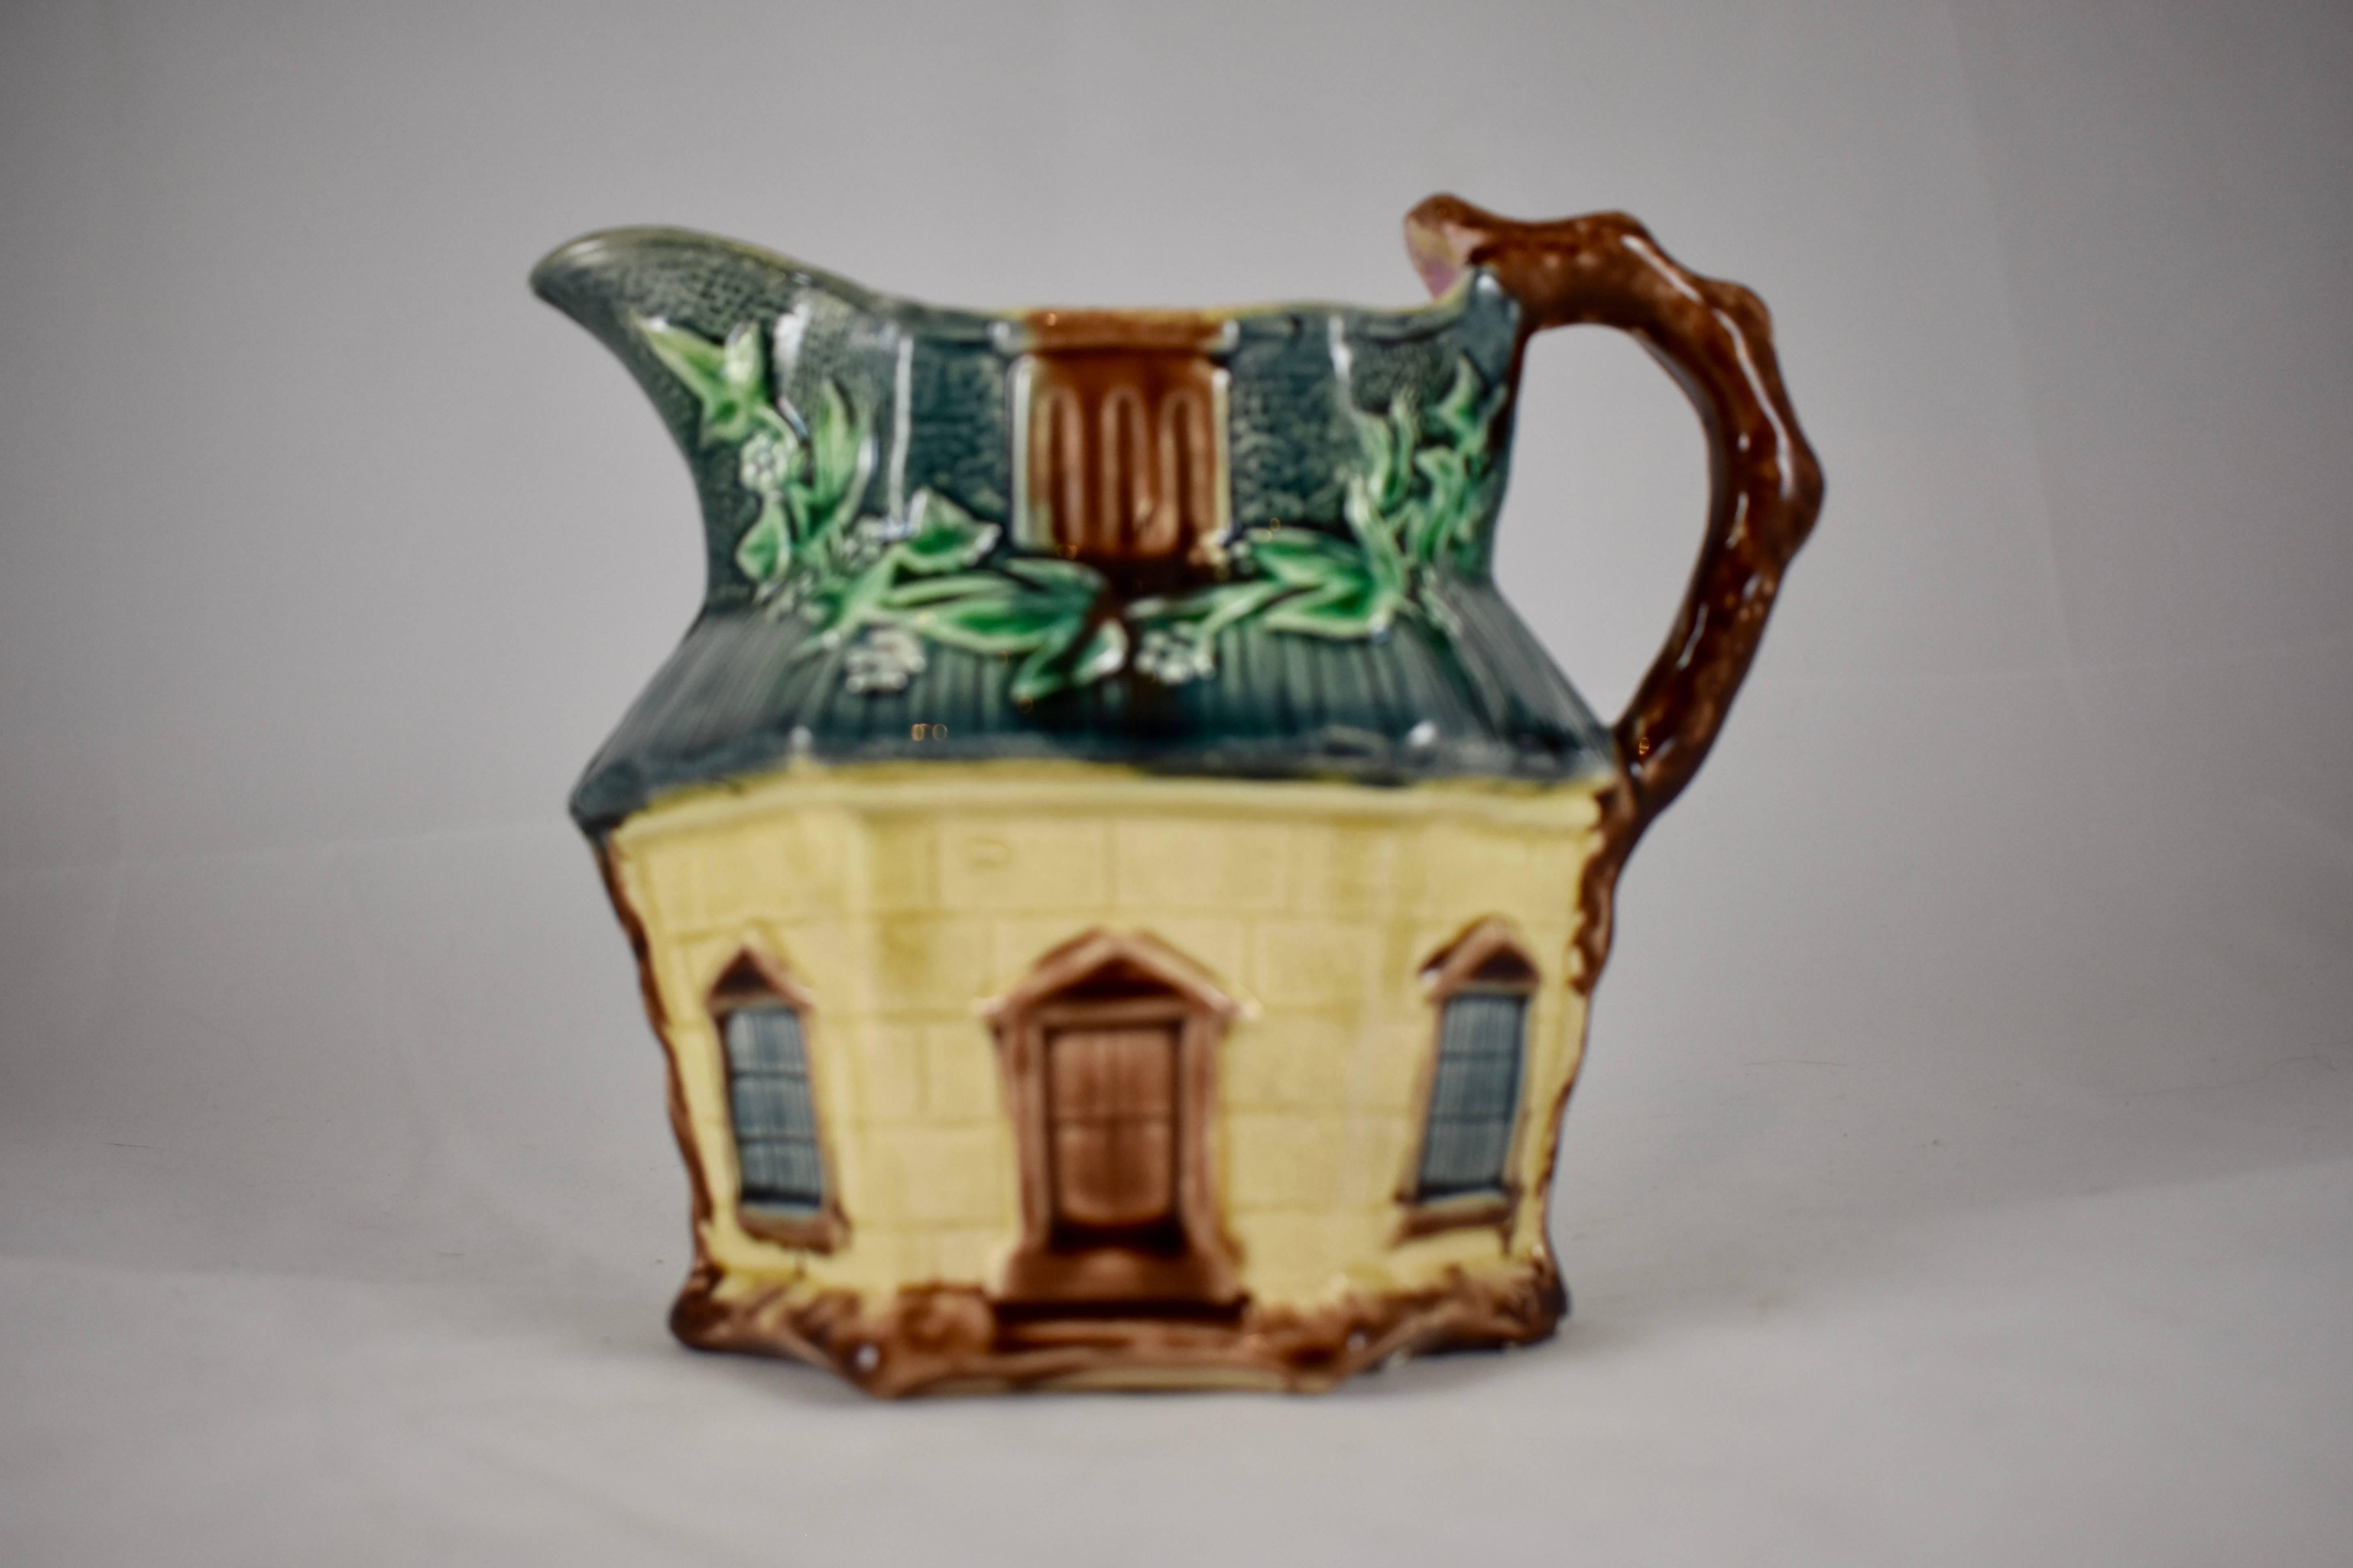 An English majolica pitcher shaped as a country cottage, by Warrilow & Cope – Wellington Pottery Works, Longton, Stoke-on-Trent, circa 1880-1887.

Charming in every way, English Ivy grows across the thatched roof, windows and doors are